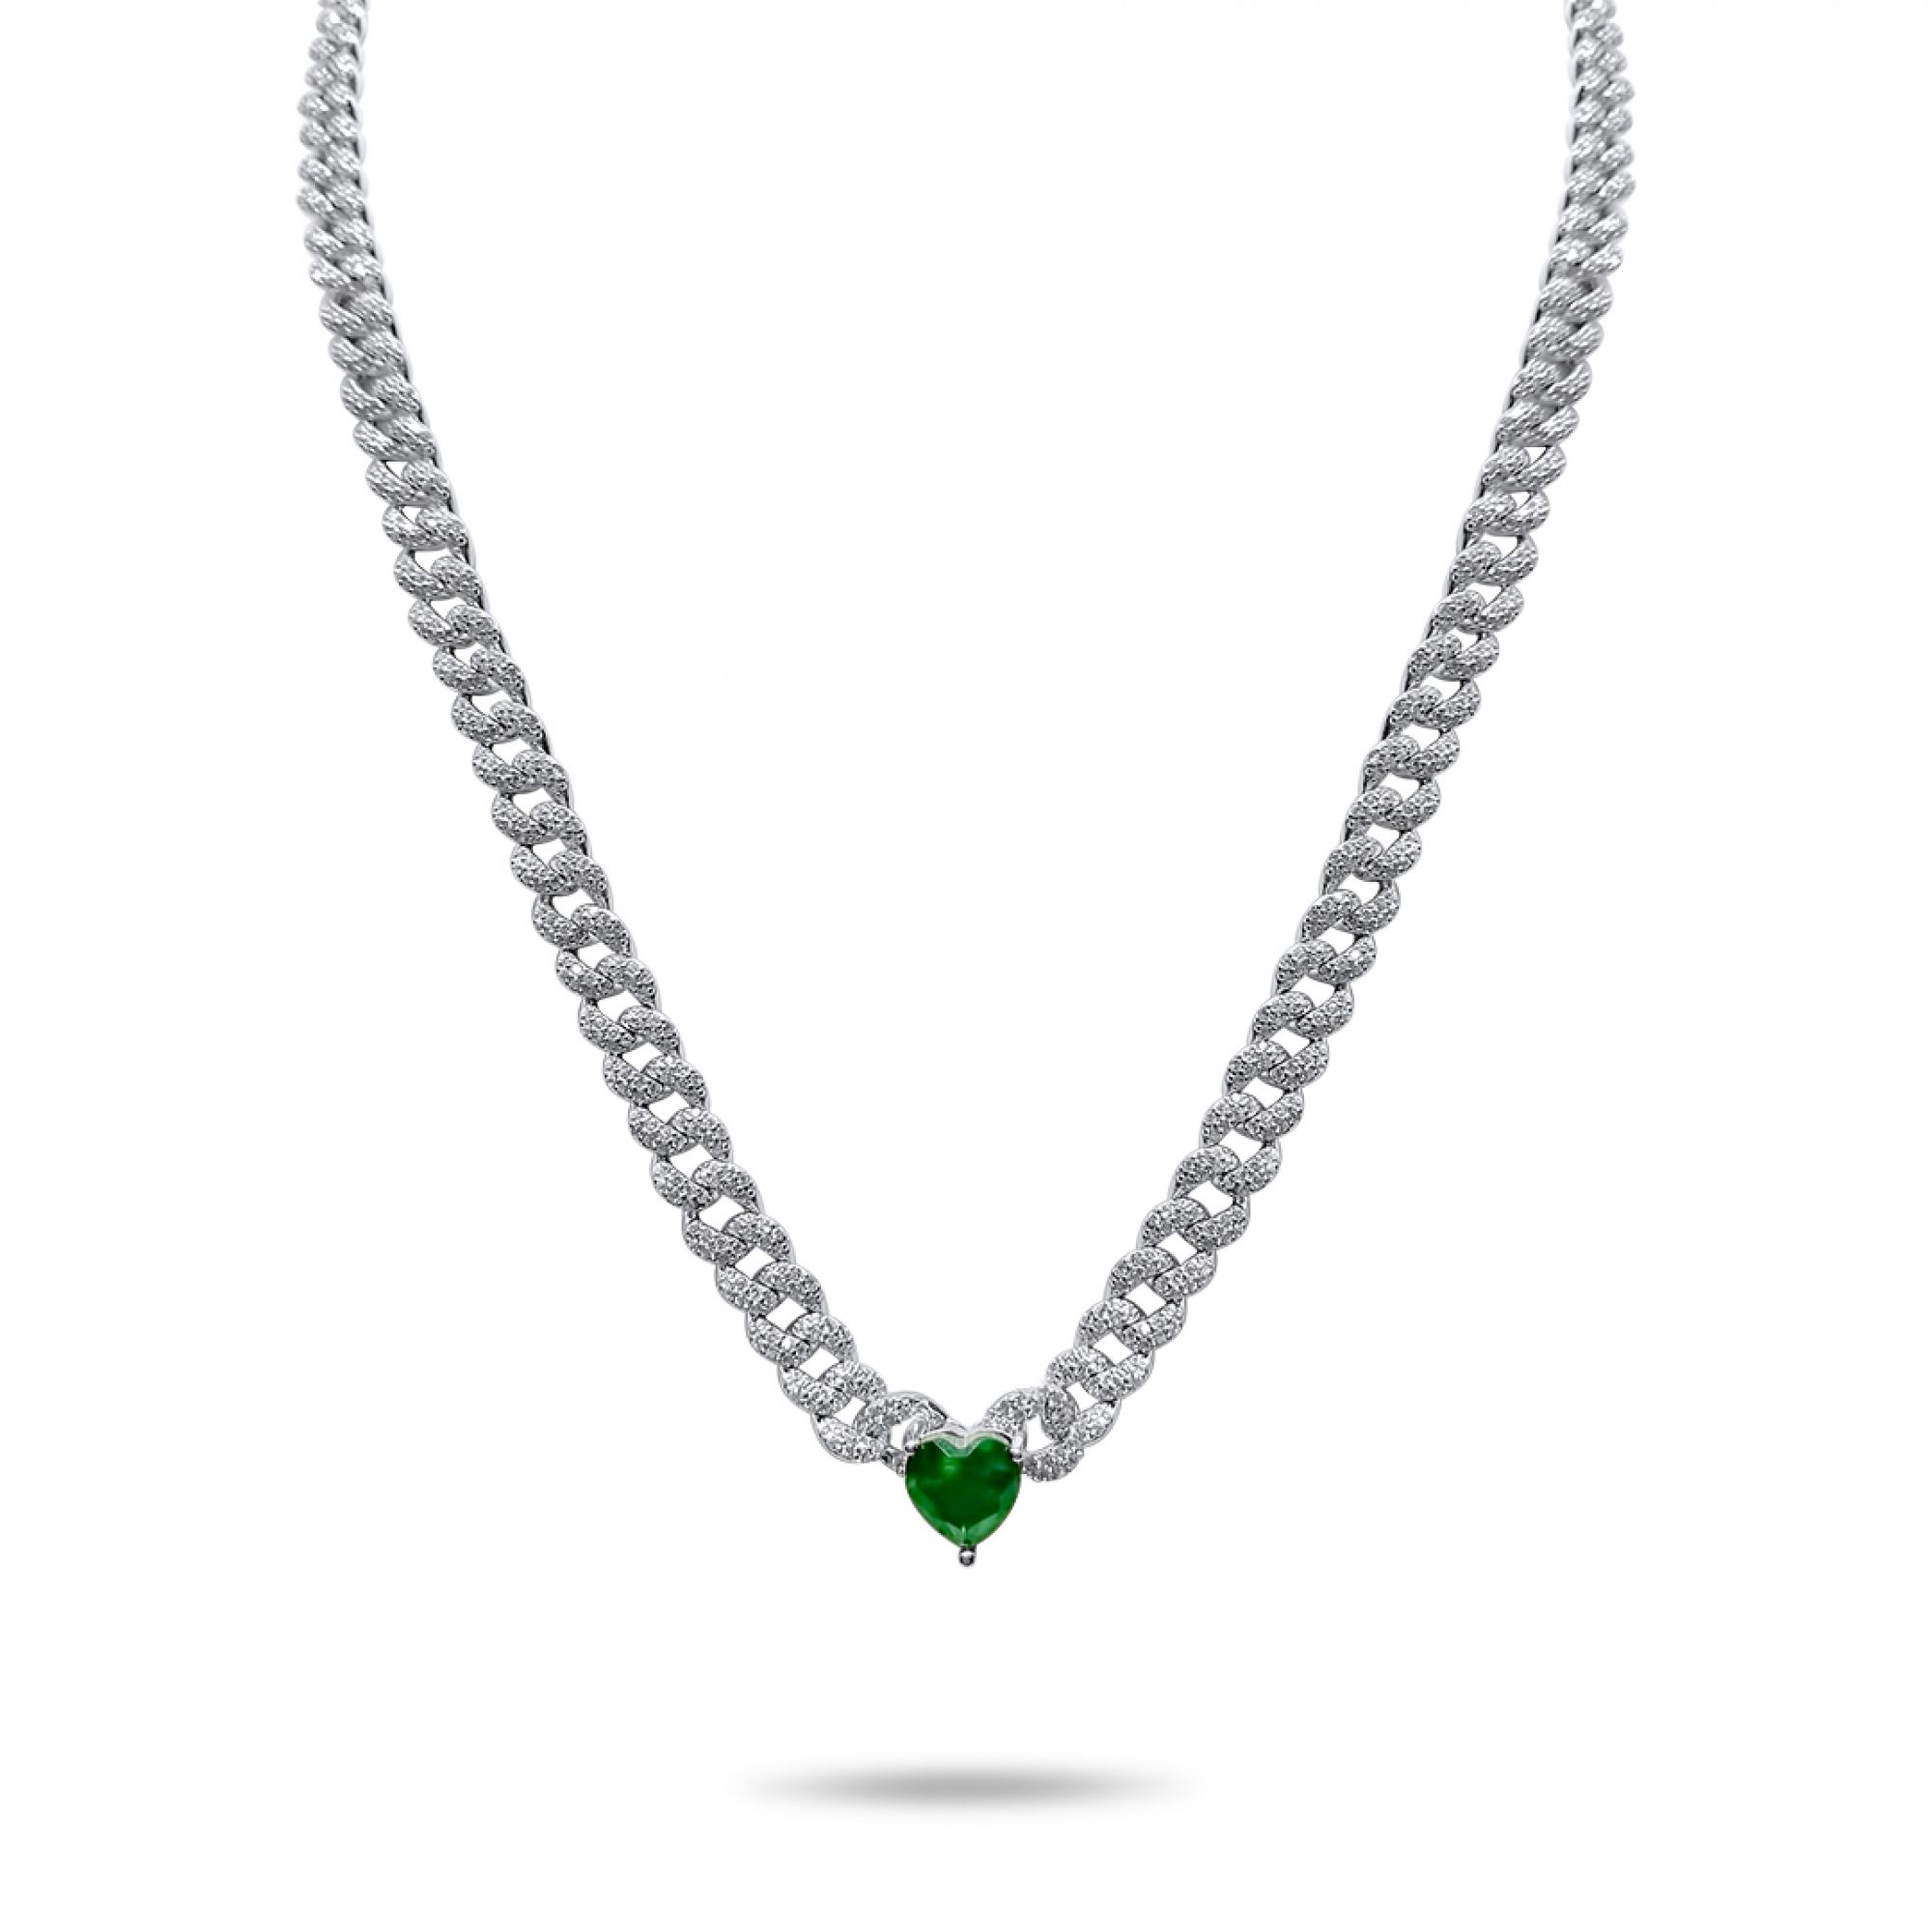 Silver chain with emerald and zircon stones